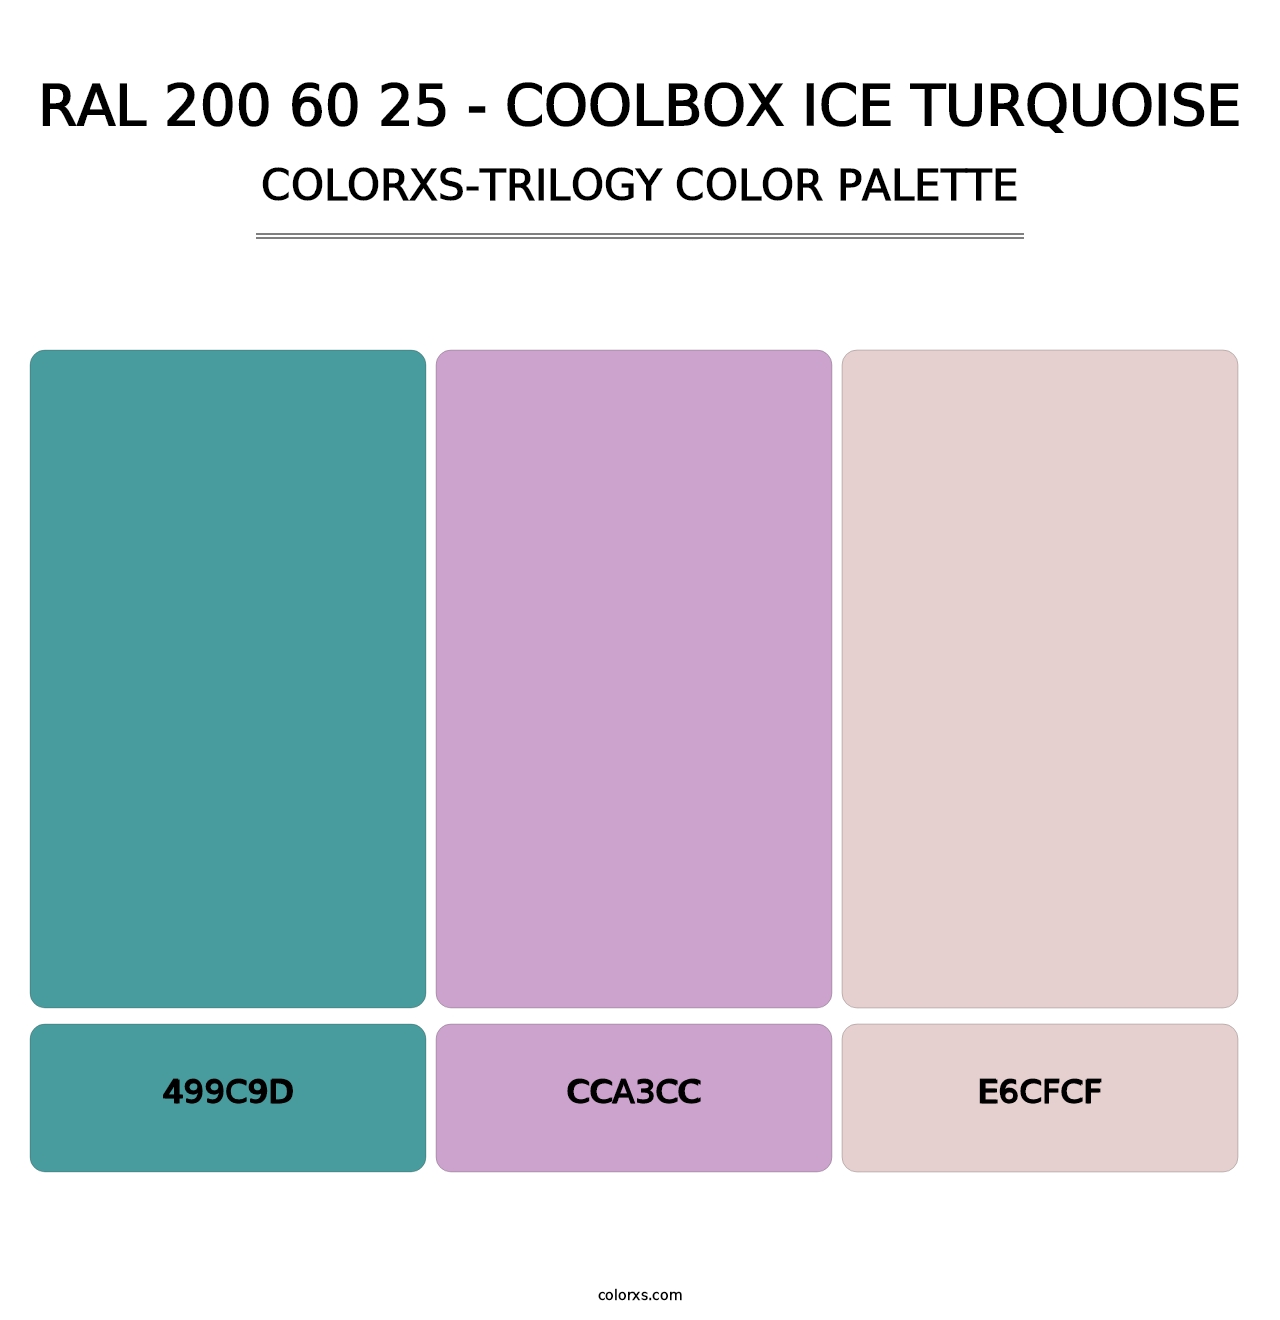 RAL 200 60 25 - Coolbox Ice Turquoise - Colorxs Trilogy Palette